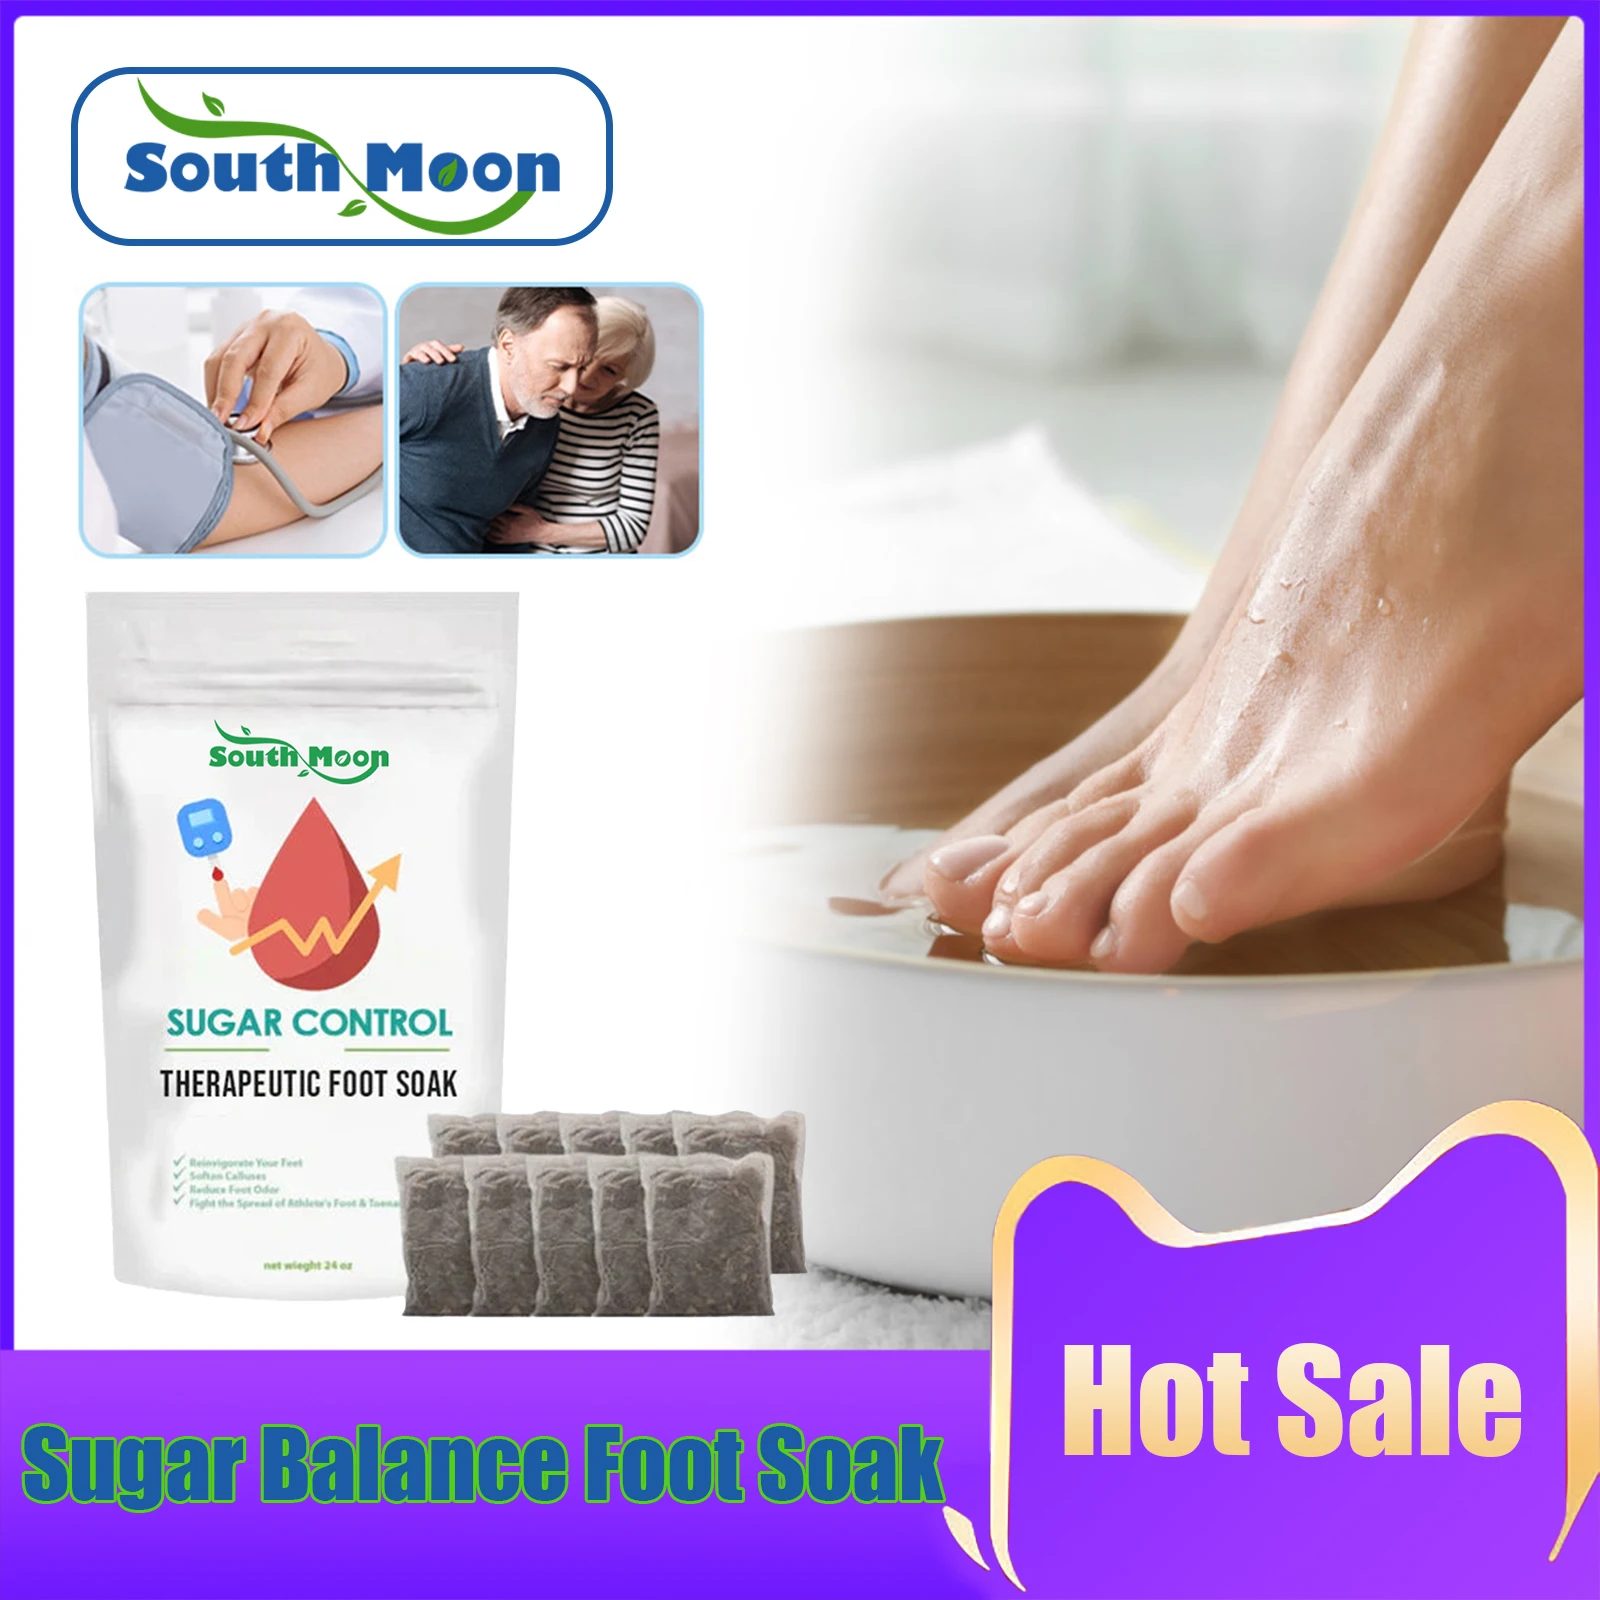 

Anti-Swelling Foot Bath Slimming Cleansing Toxin Relieve Fatigue Insomnia Promote Blood Circulation Lymph Detox Foot Soak 10pcs